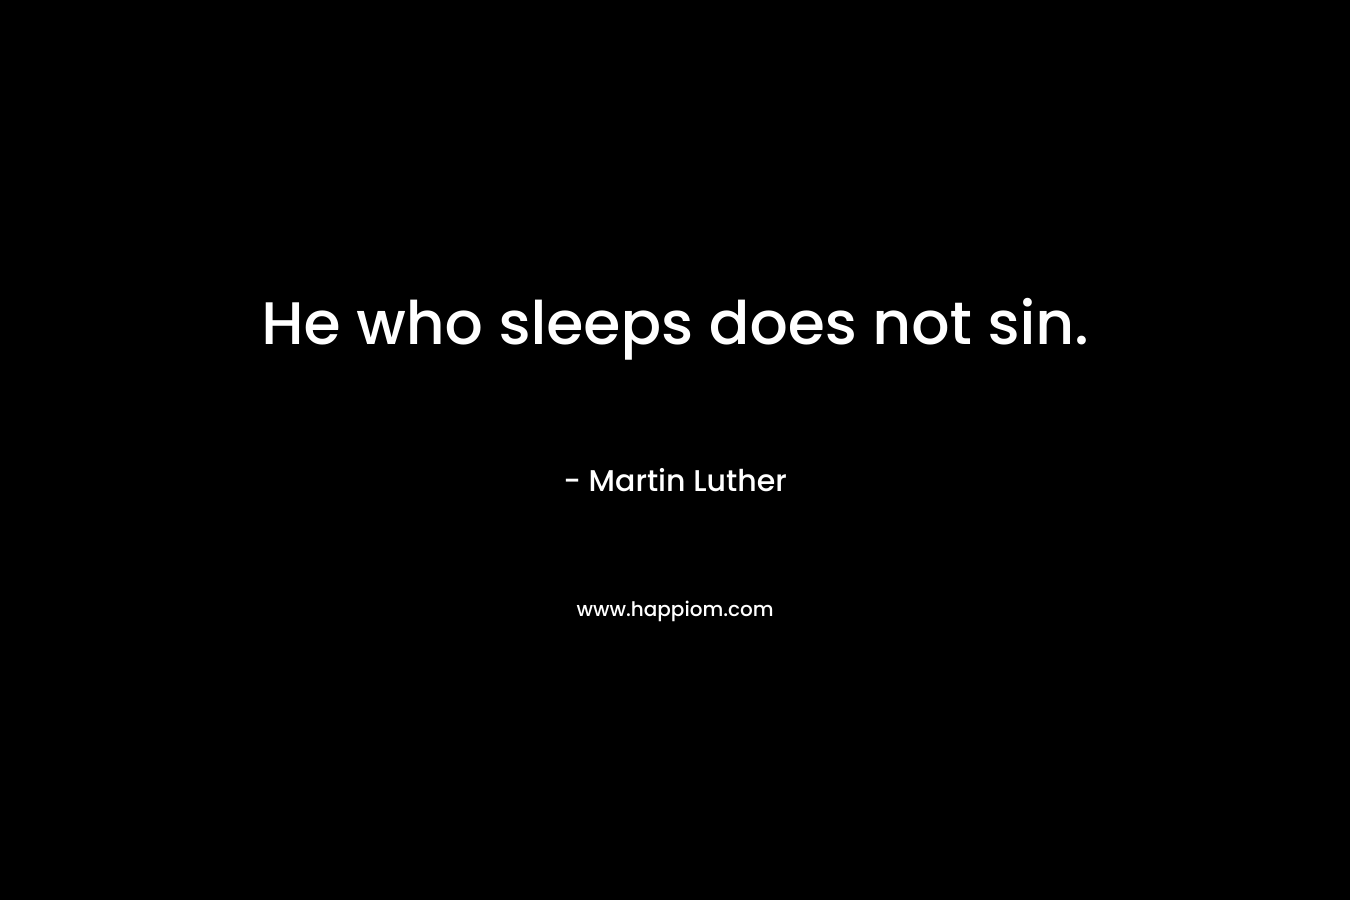 He who sleeps does not sin.